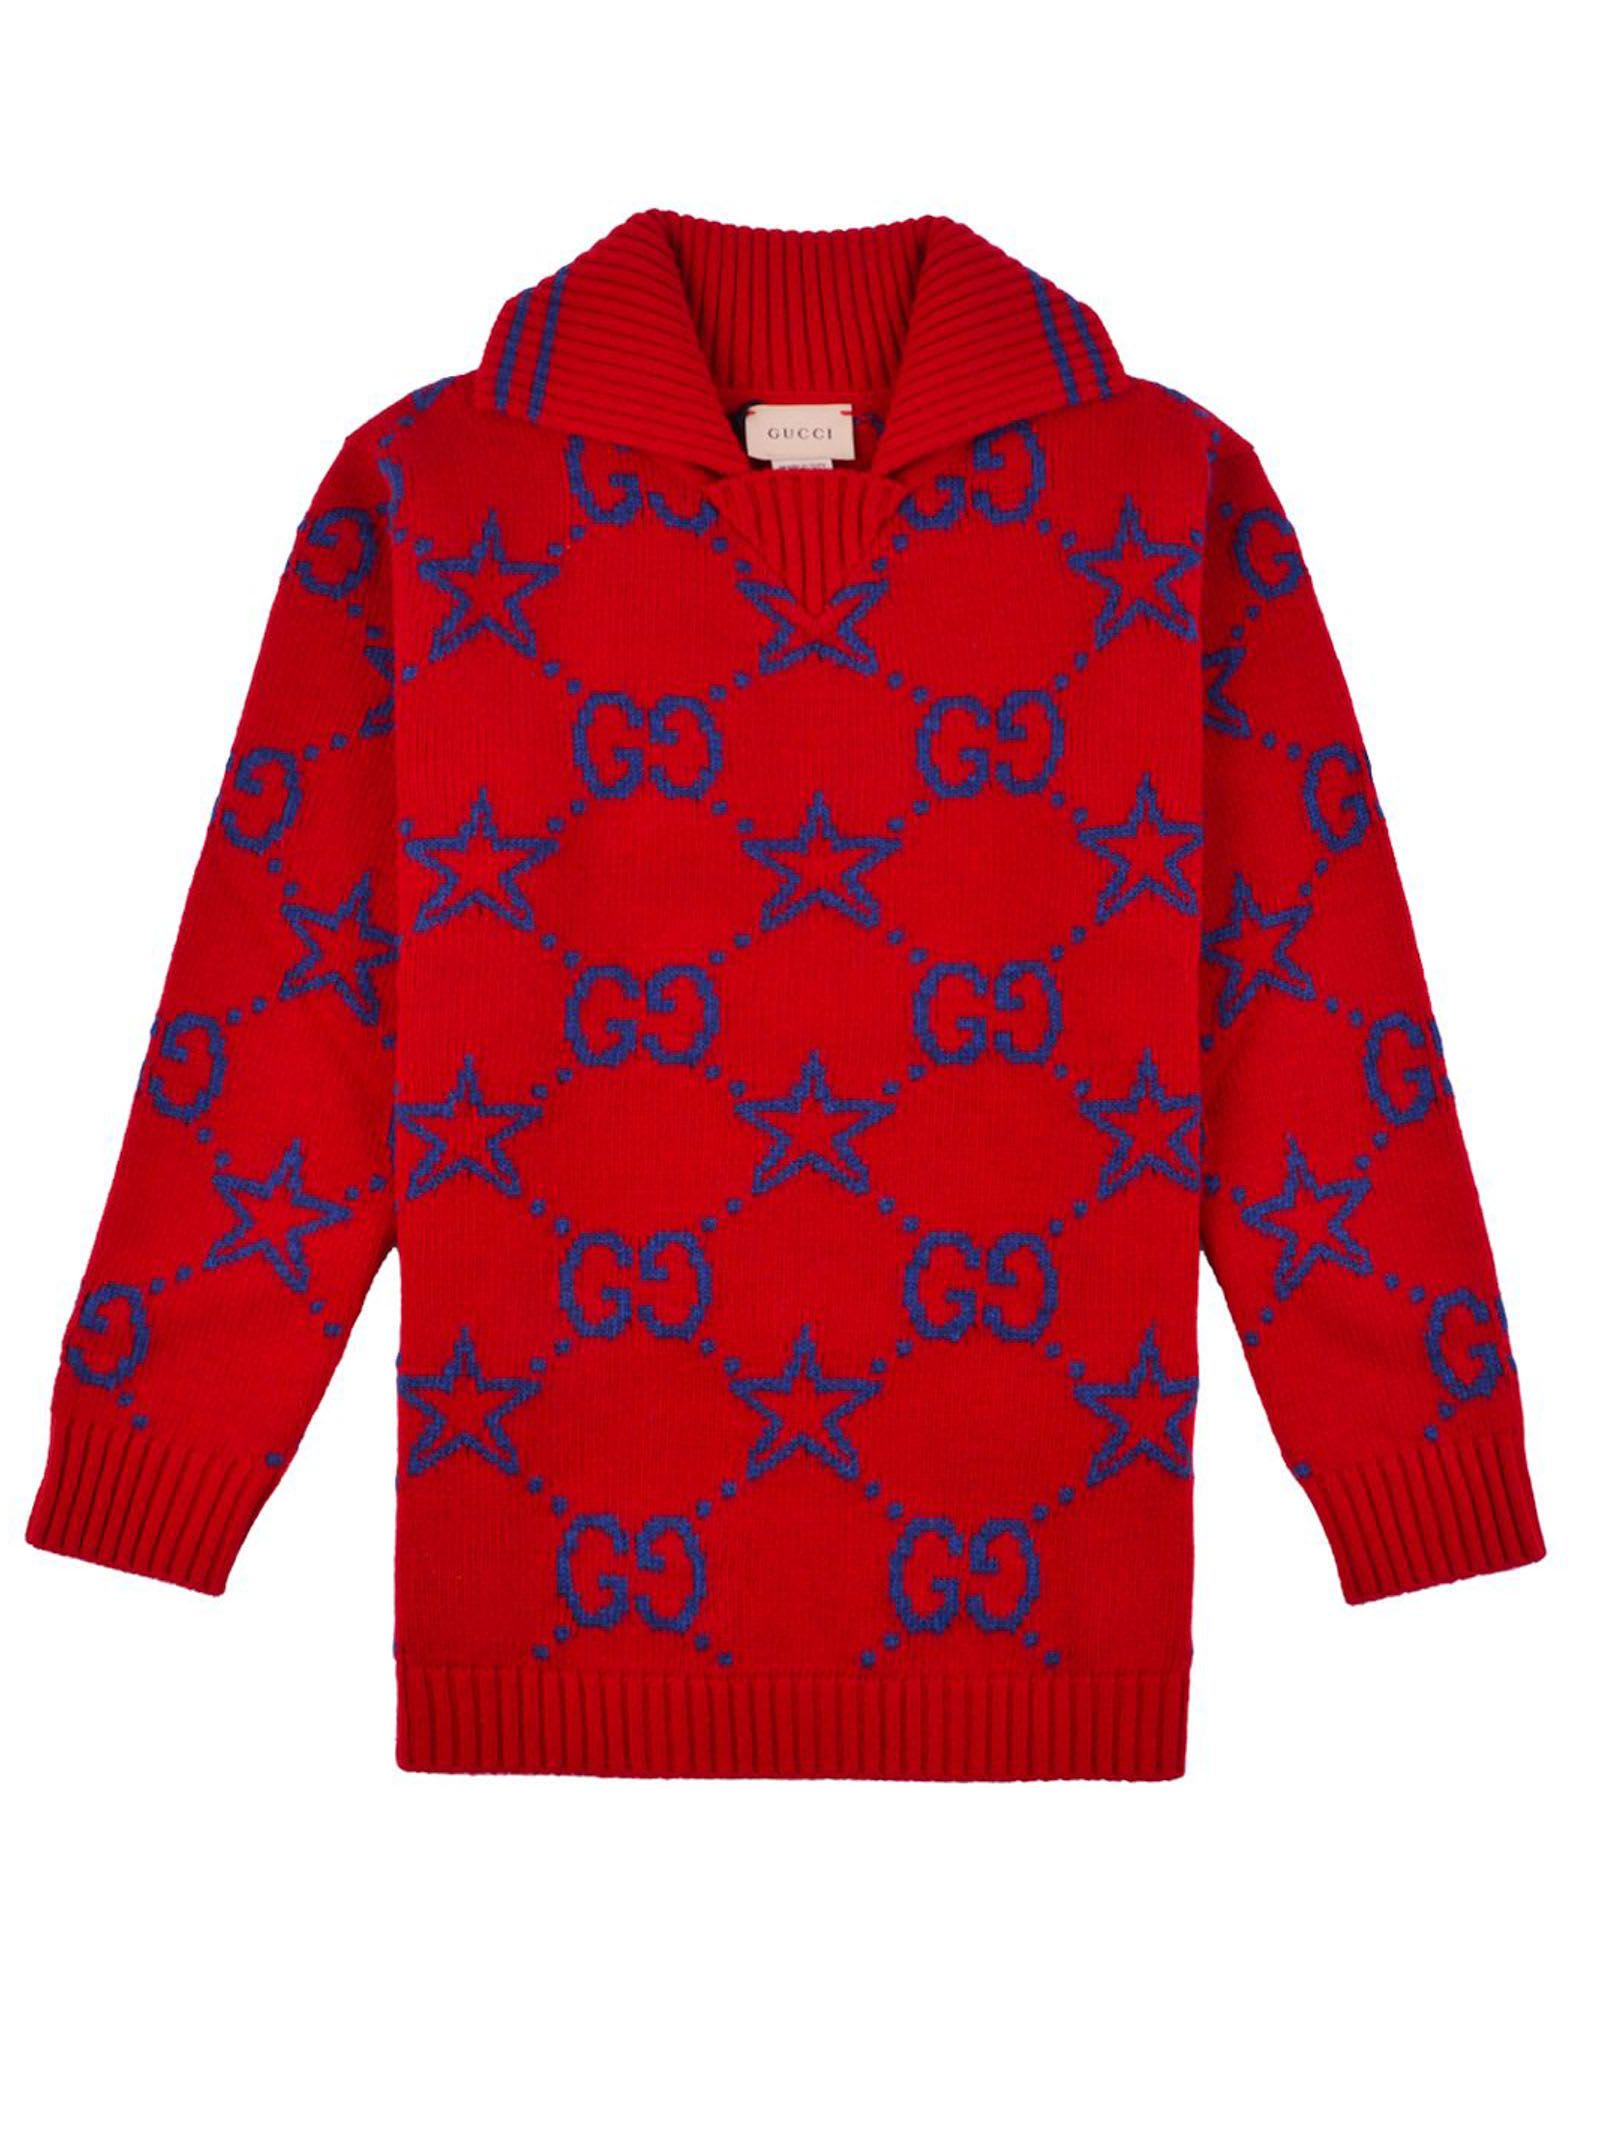 Gucci Red Wool Sweater